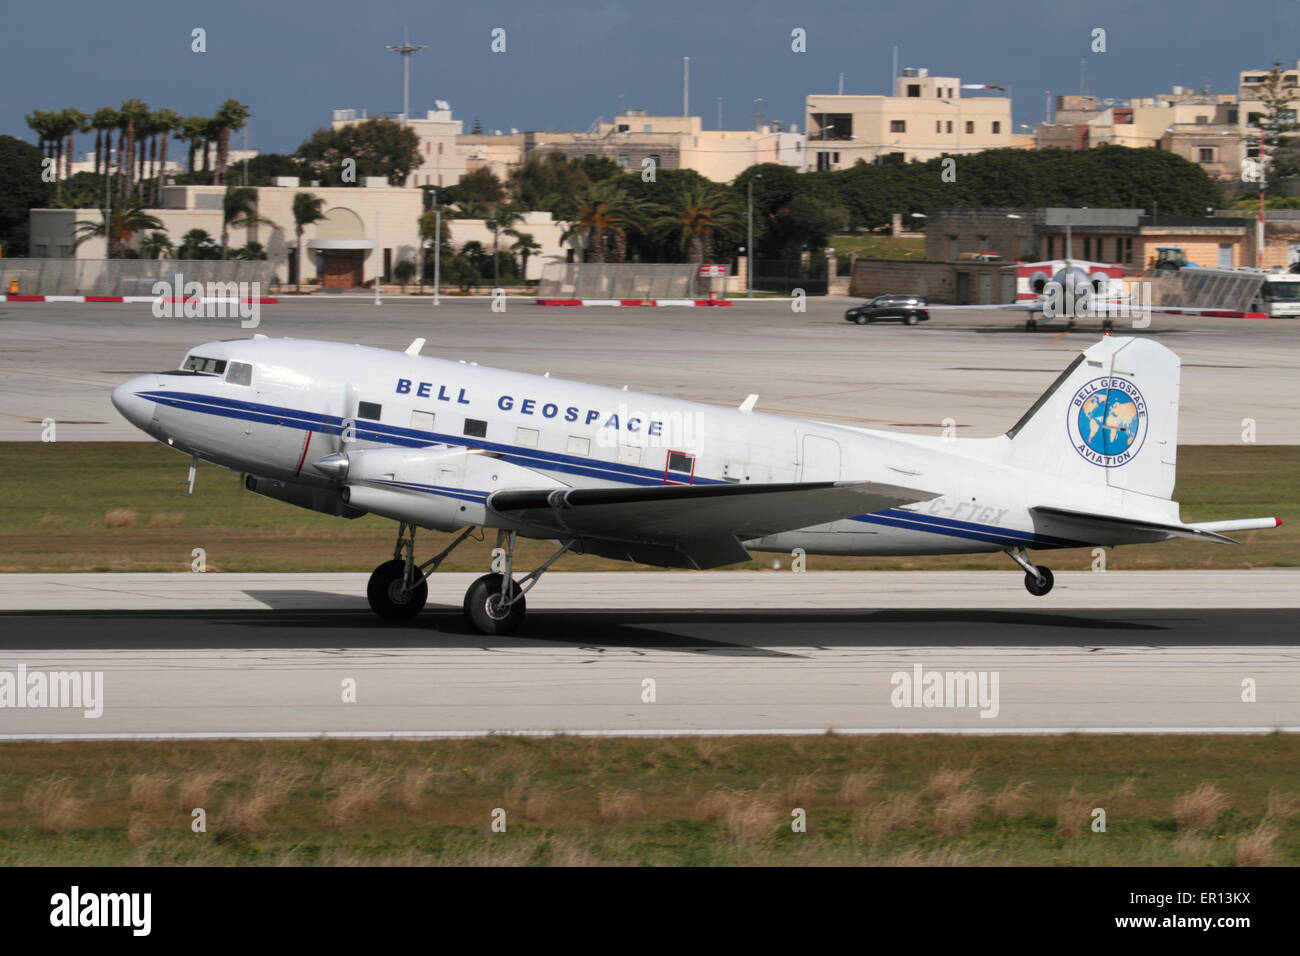 Basler BT-67 (turboprop conversion of the Douglas DC-3) operated by Bell Geospace as a geological survey aircraft Stock Photo